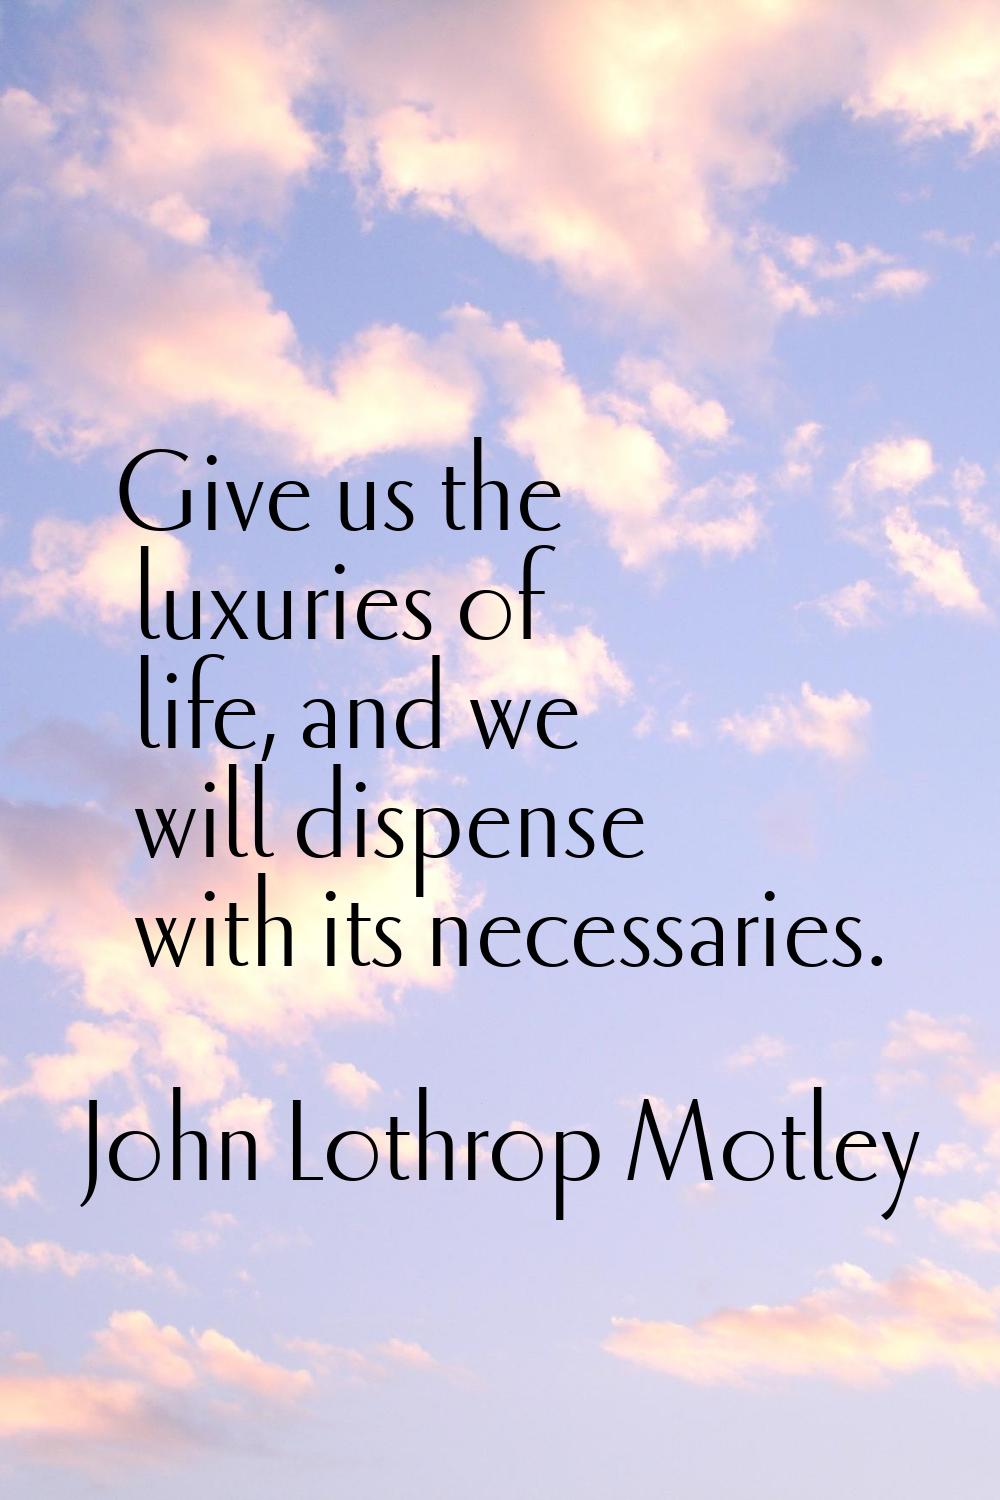 Give us the luxuries of life, and we will dispense with its necessaries.